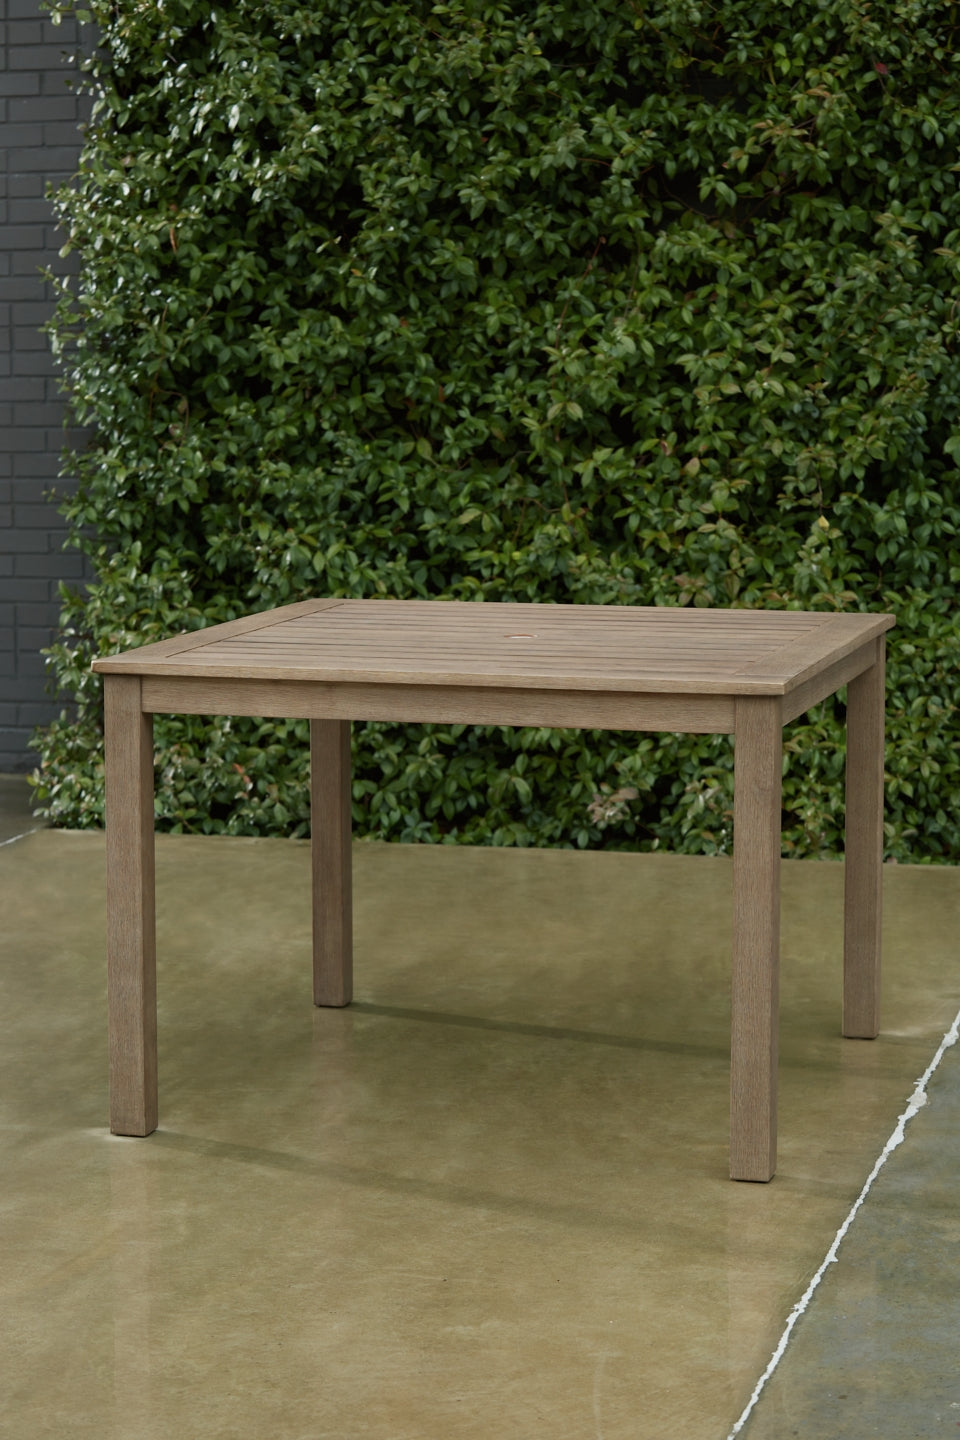 Aria Plains Outdoor Dining Table - furniture place usa